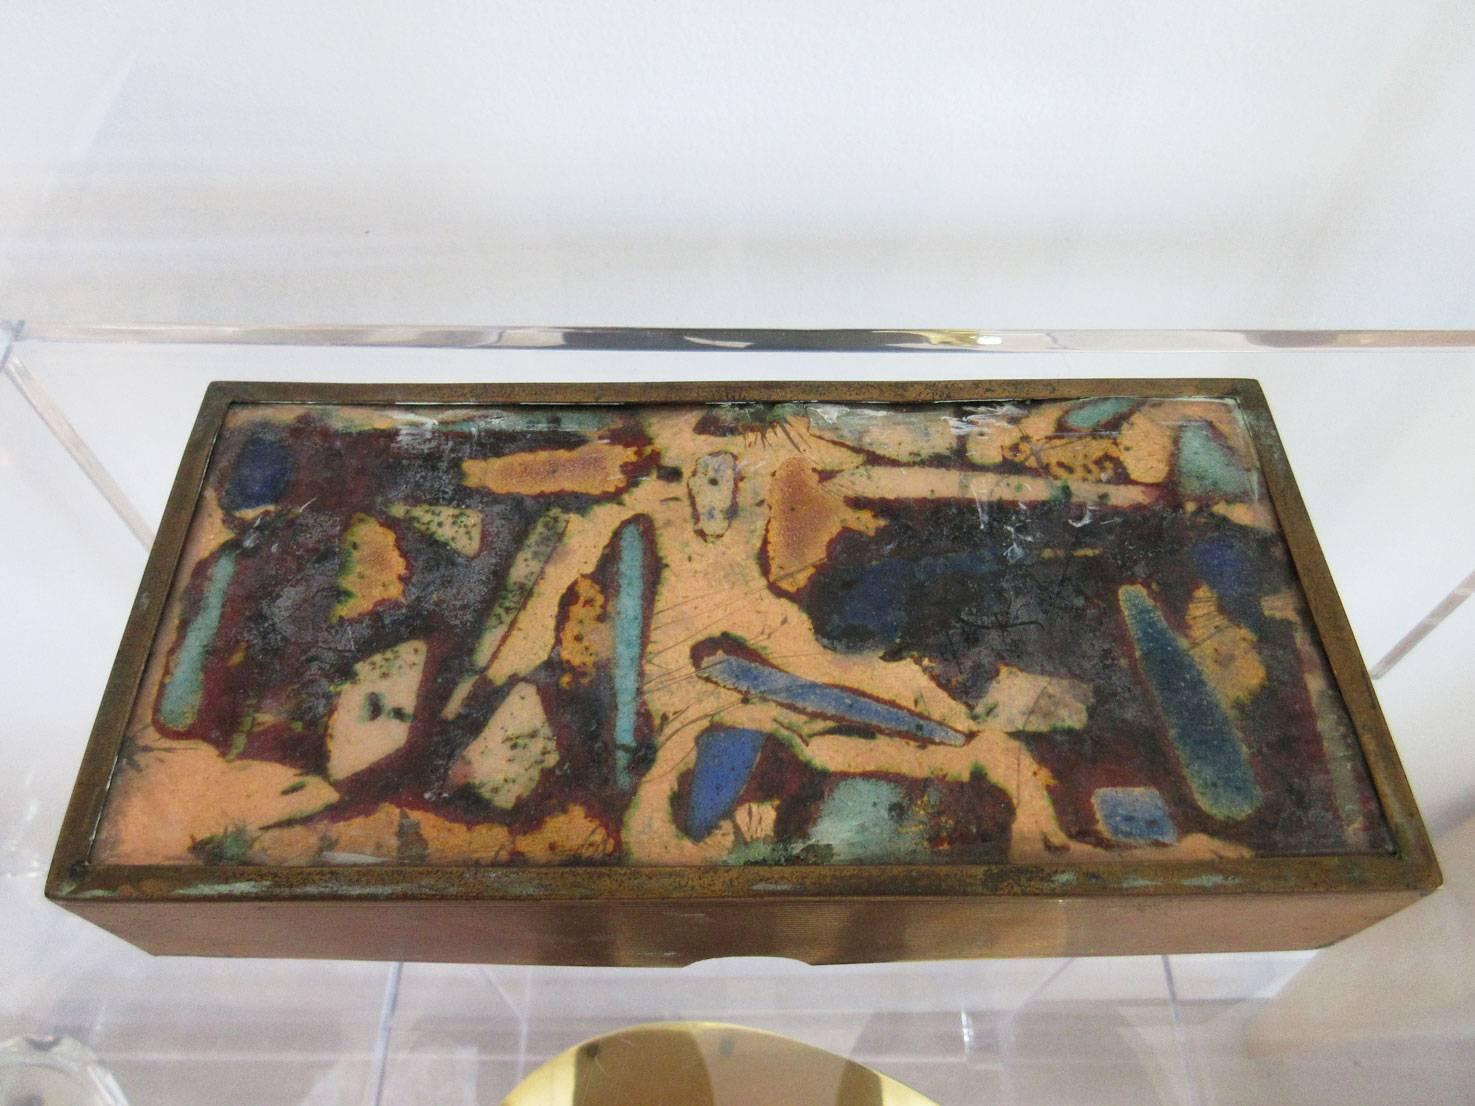 Vintage modernist Italian box rectangular in shape with expressionistic enamel top and bronze body. The makers mark is illegible.